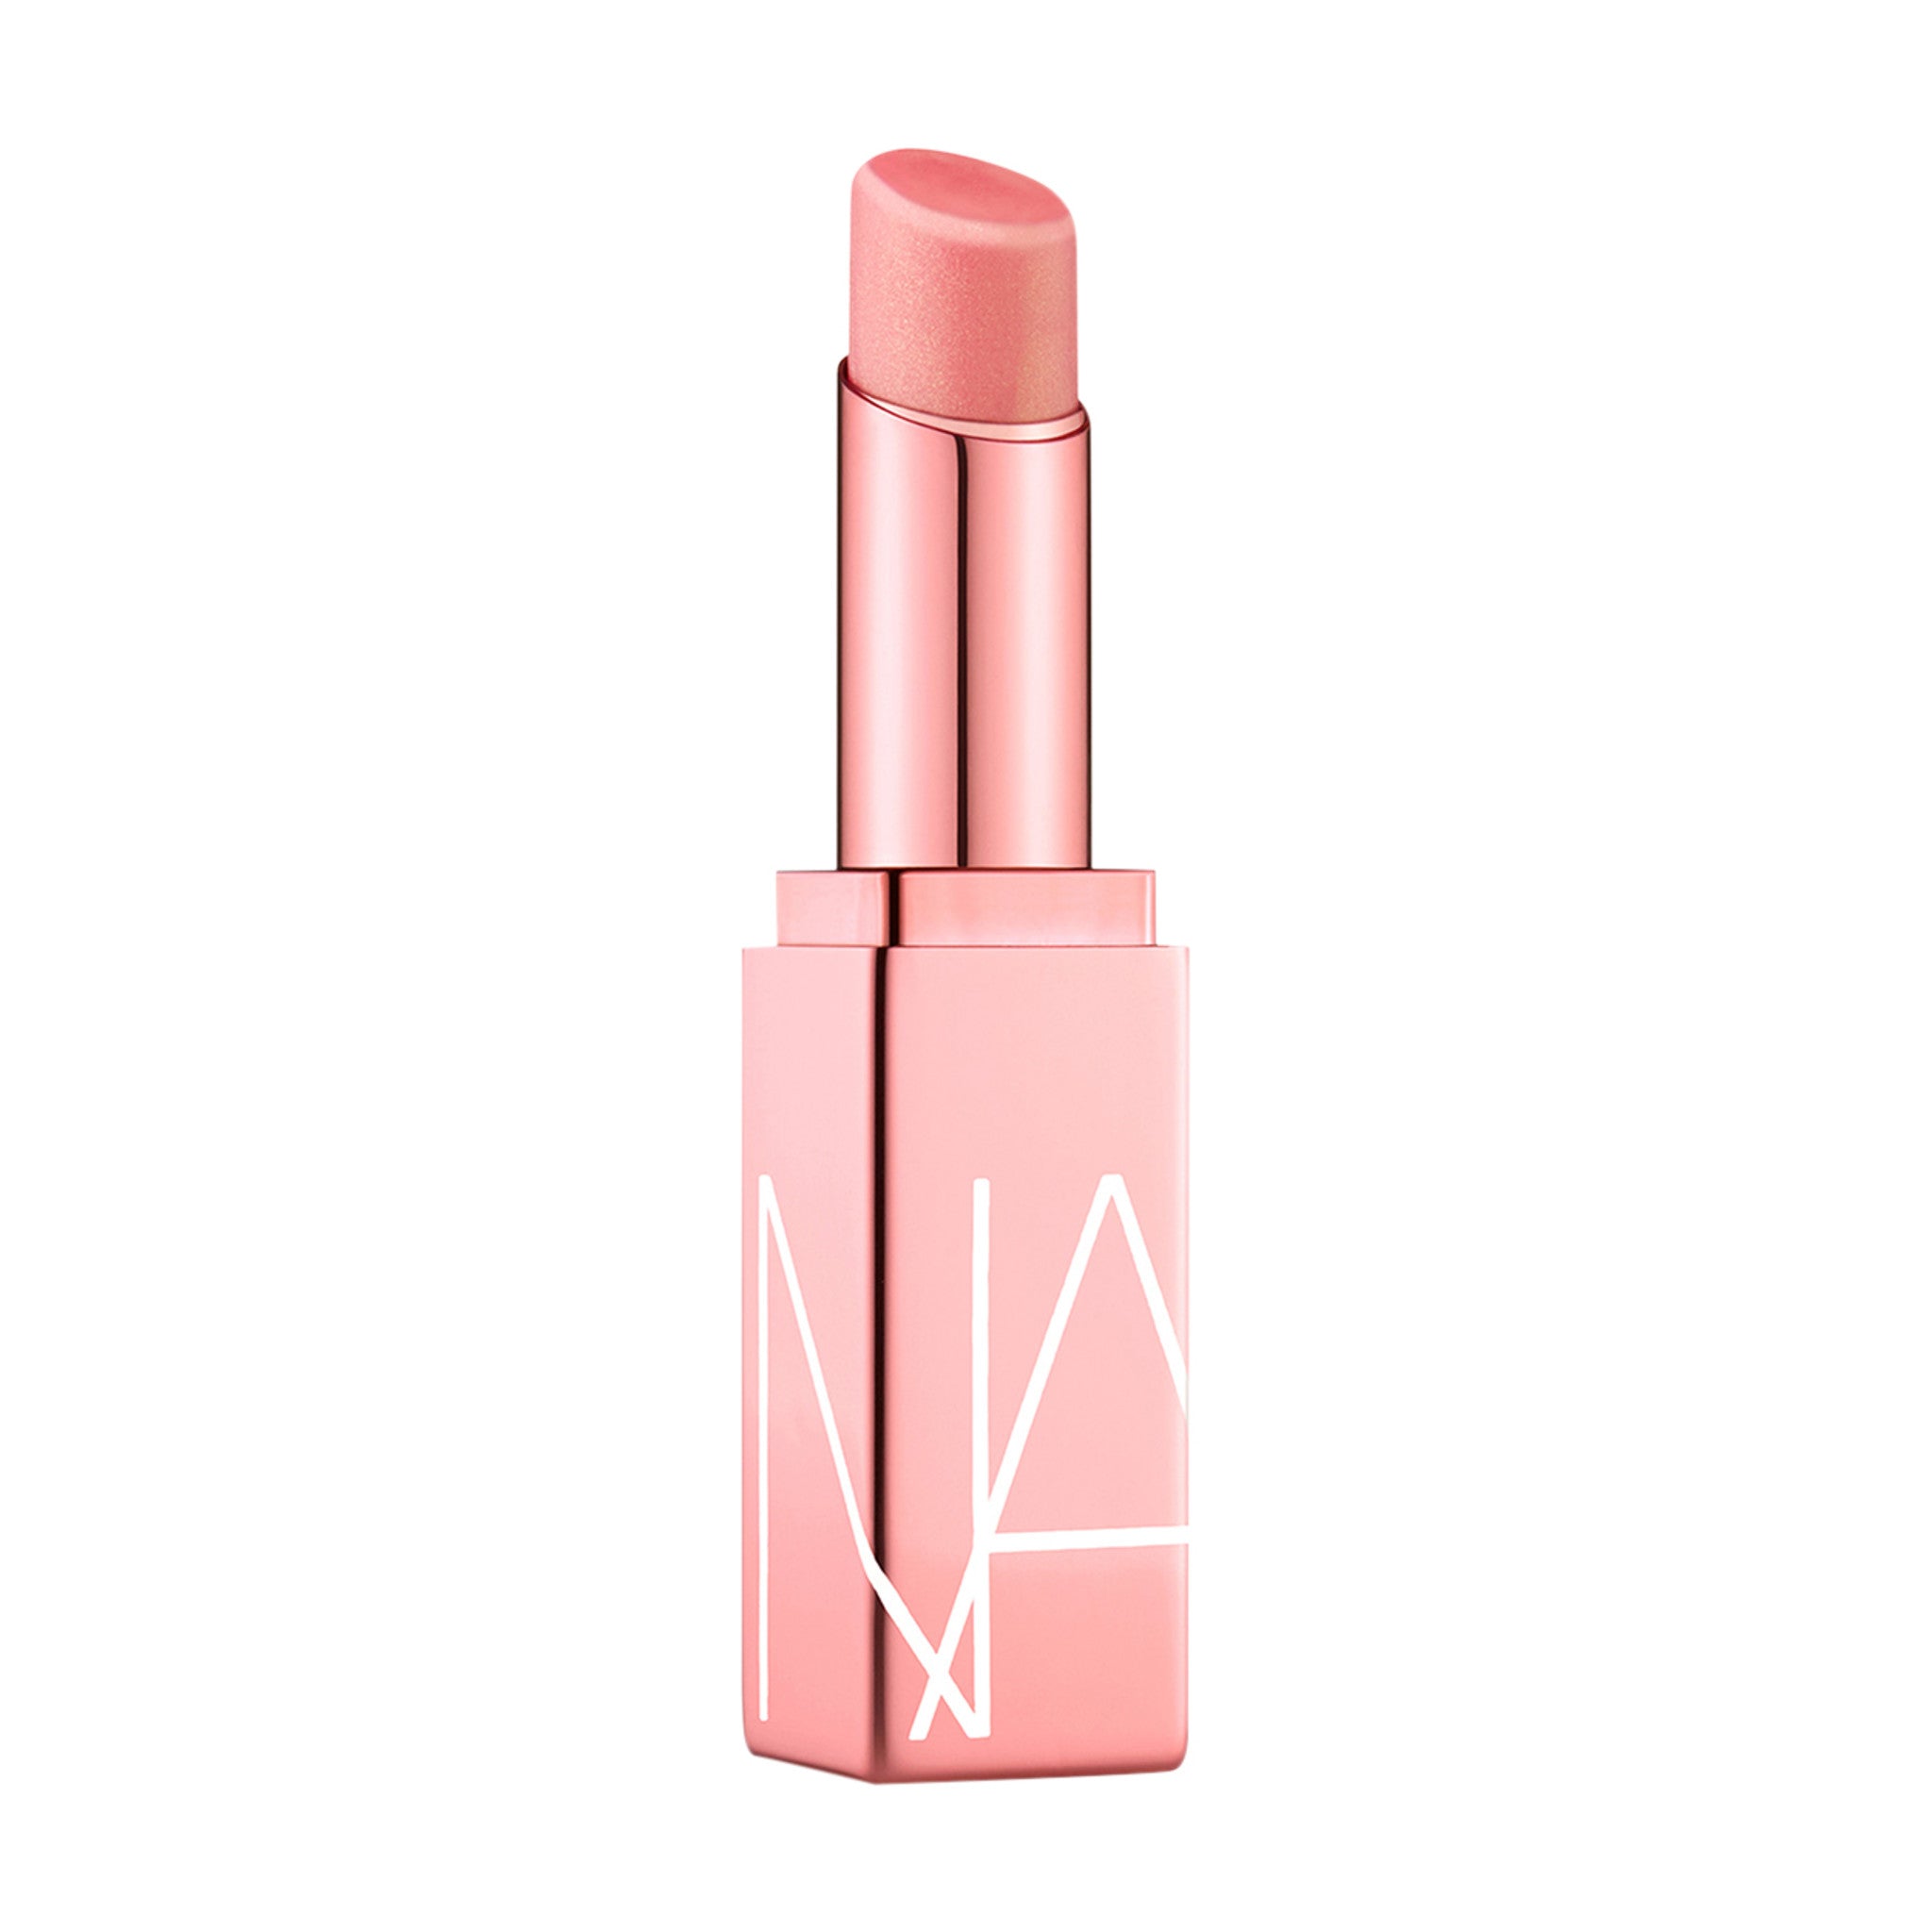 Nars Afterglow Lip Balm Color/Shade variant: Orgasm main image. This product is in the color nude